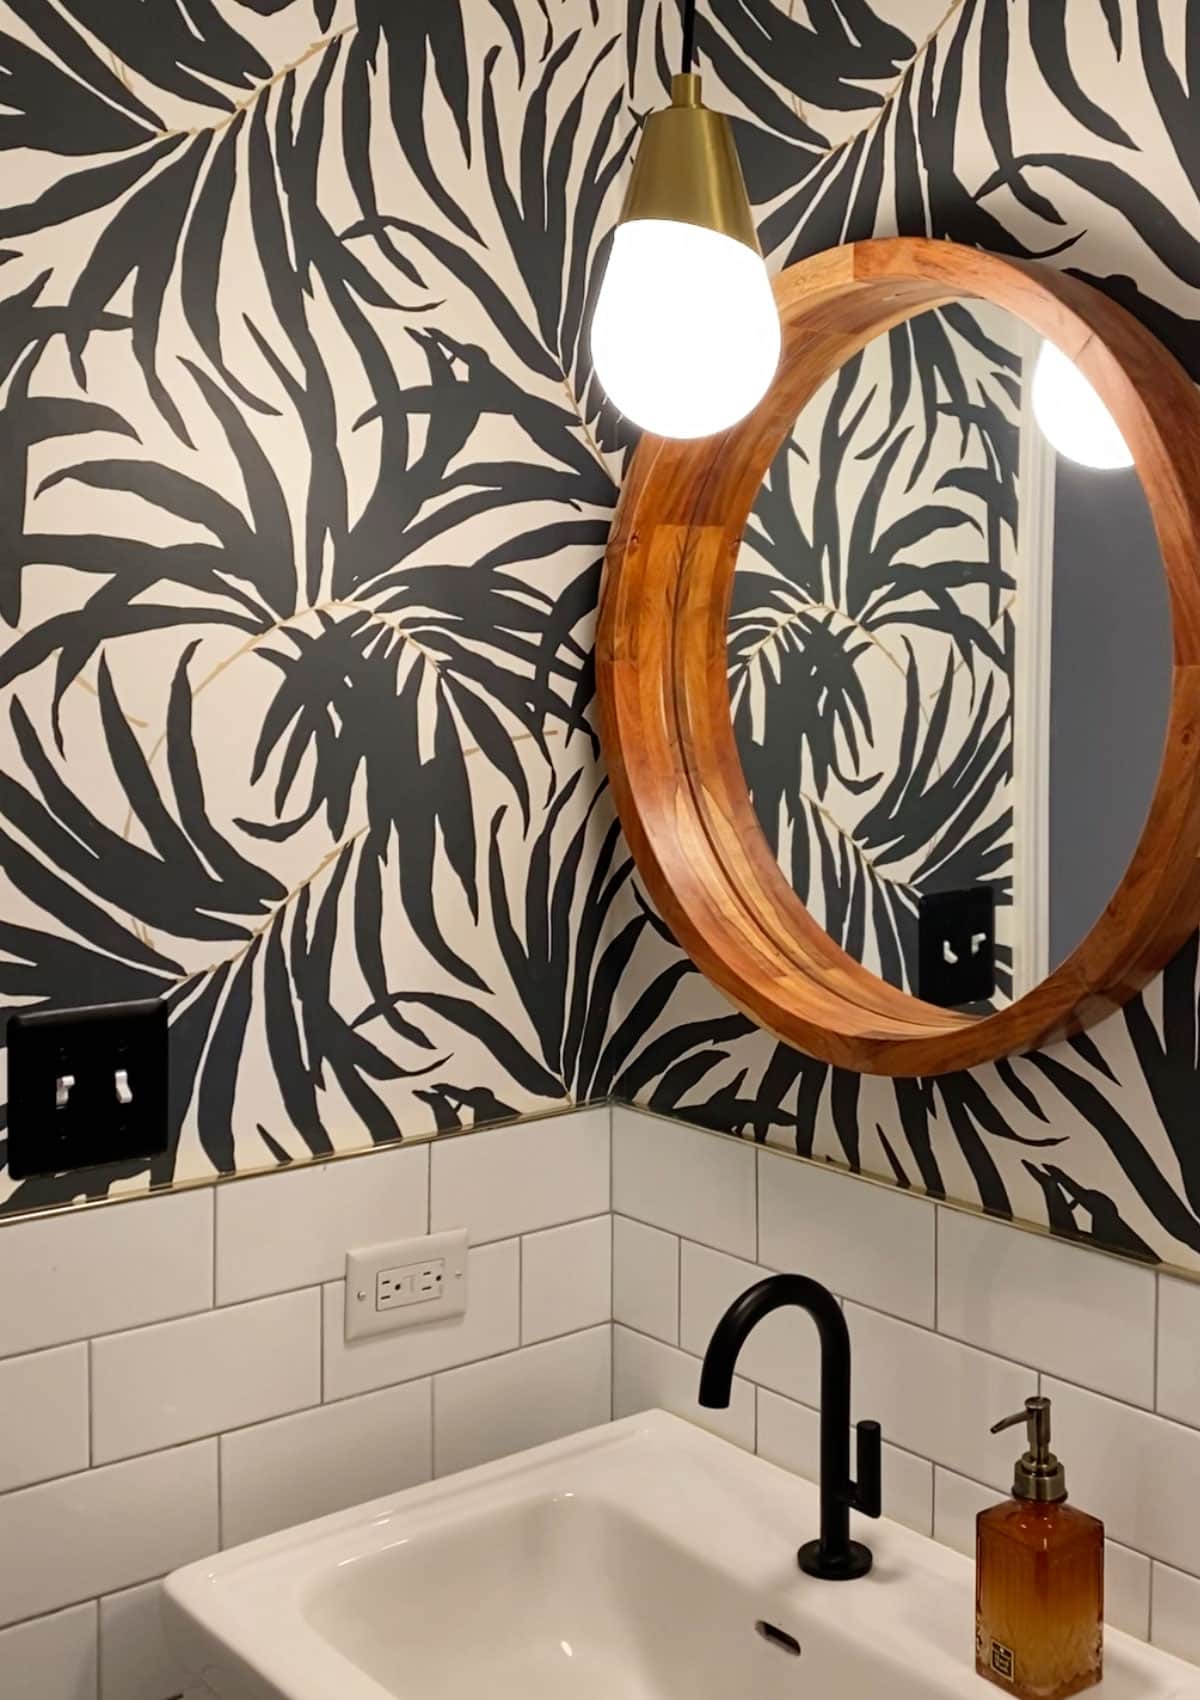 Black and White Bathroom Renovation Before and After - Transforming an old, outdated, boring bathroom and creating a stunning modern black and white bathroom with palm frond wallpaper and subway tile.